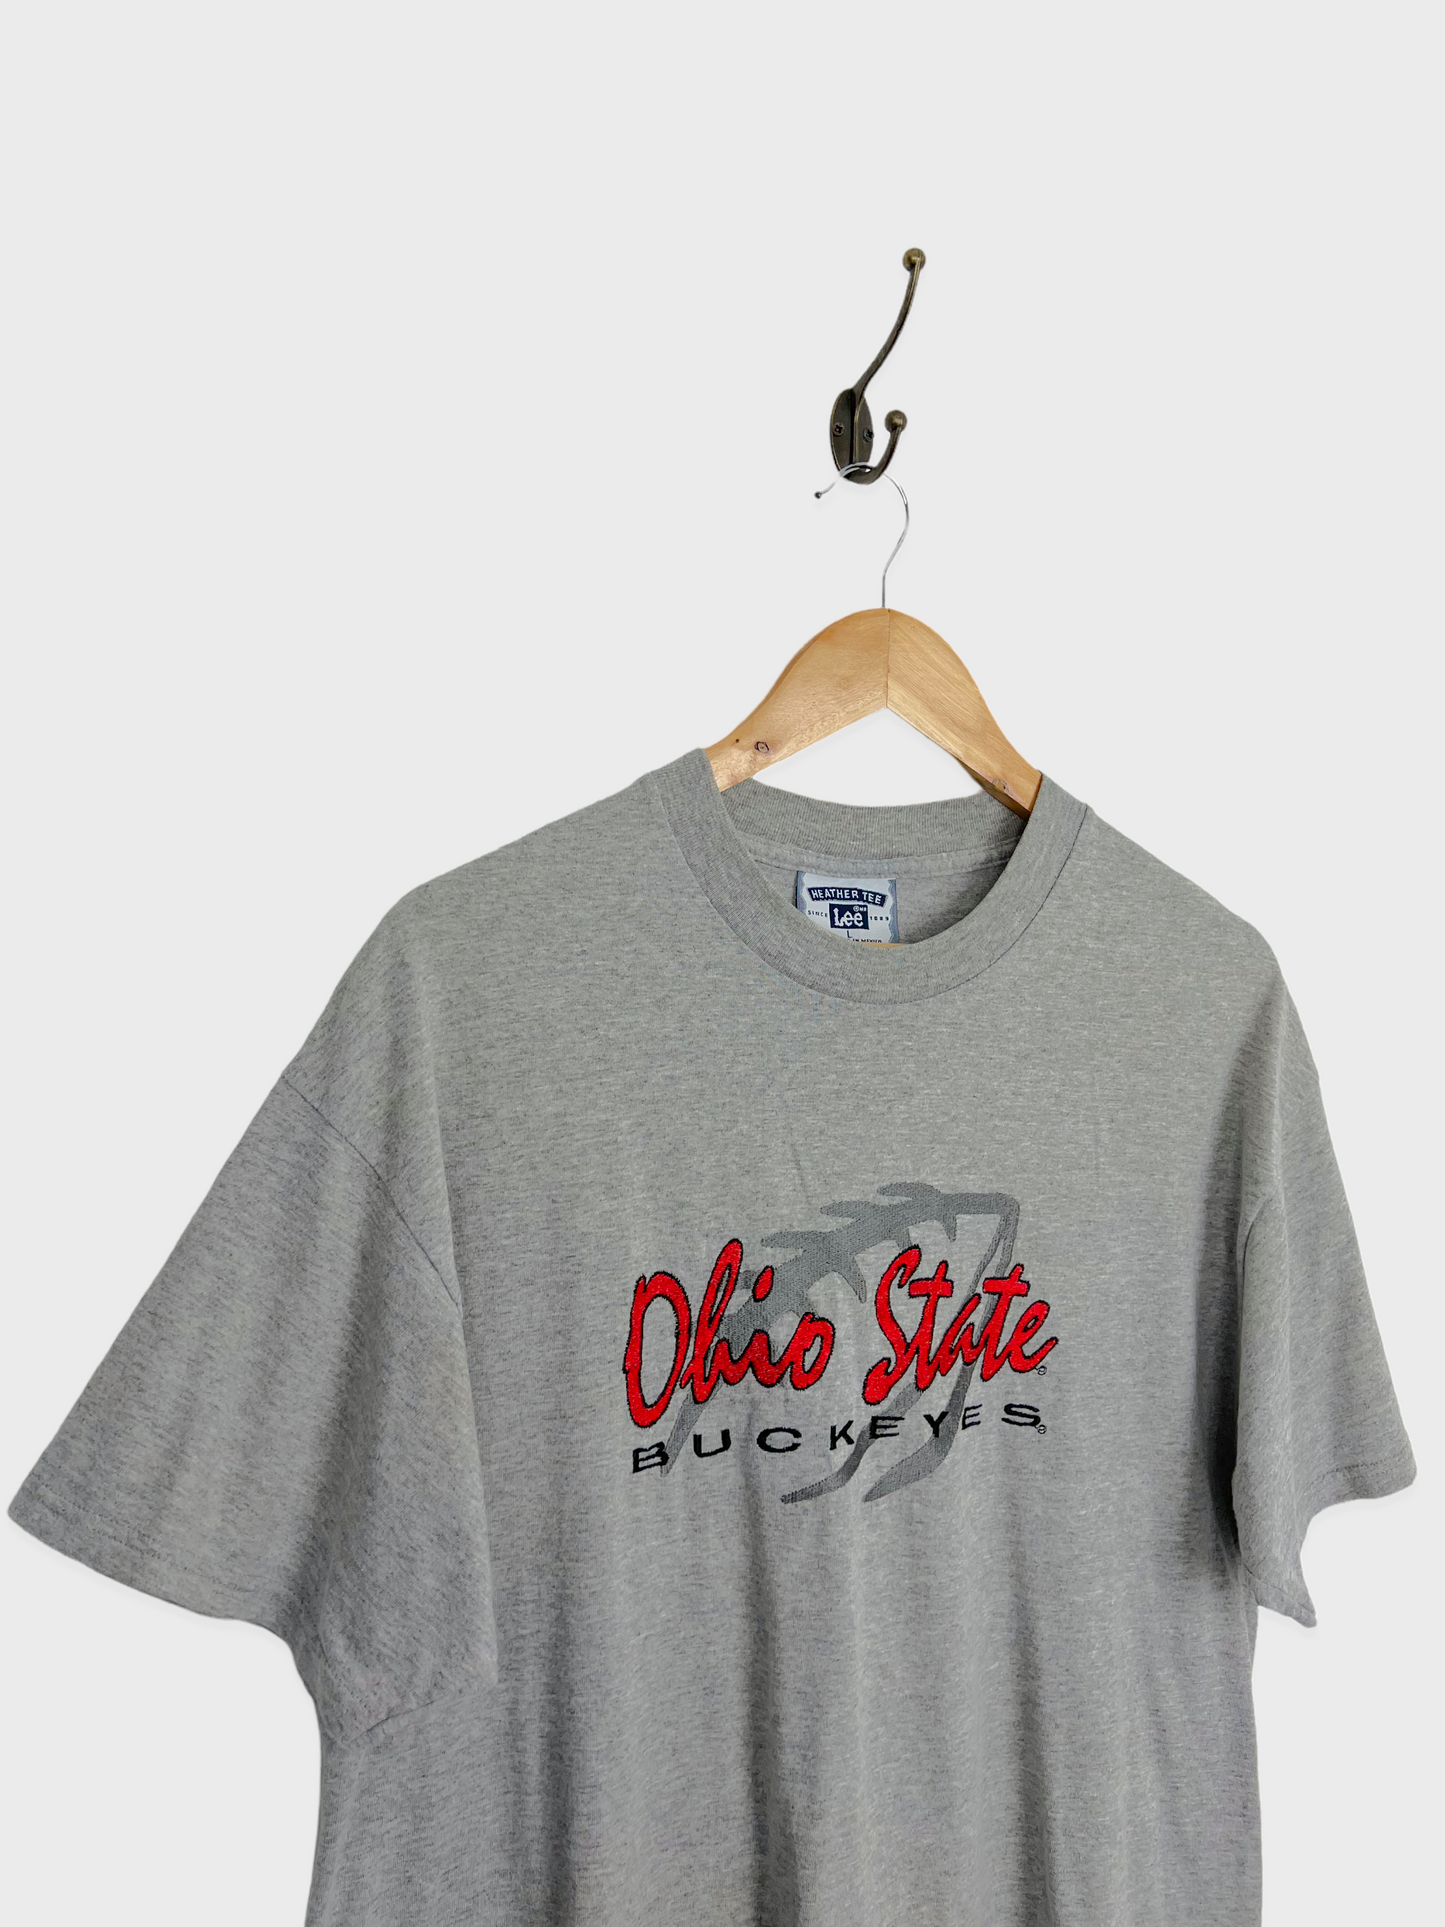 90's Ohio State Buckeyes Embroidered Vintage T-Shirt Size 14